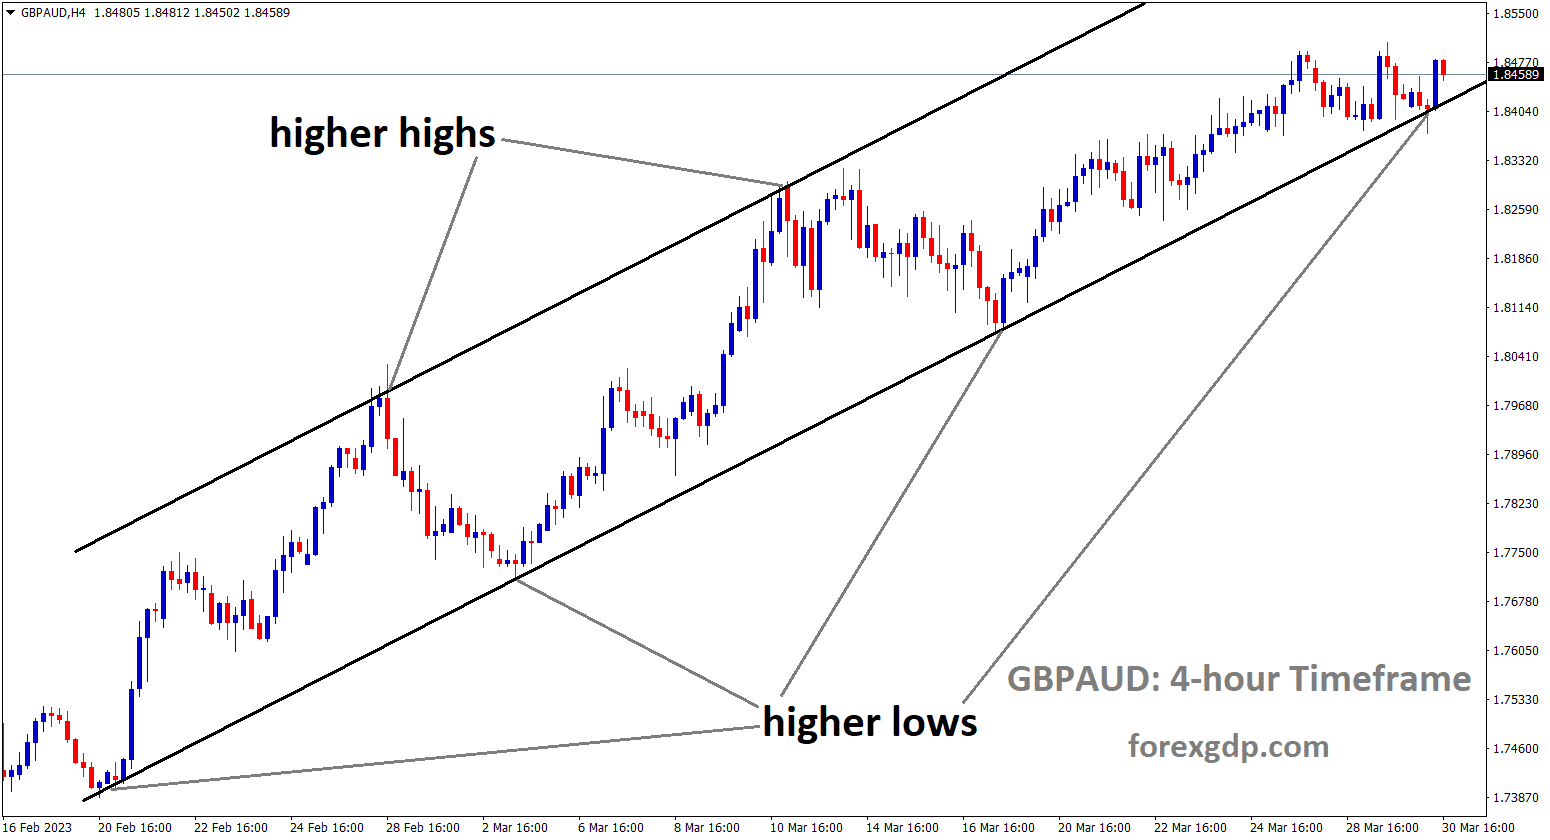 GBPAUD is moving an Ascending channel and the market has reached the higher low area of the channel. 1